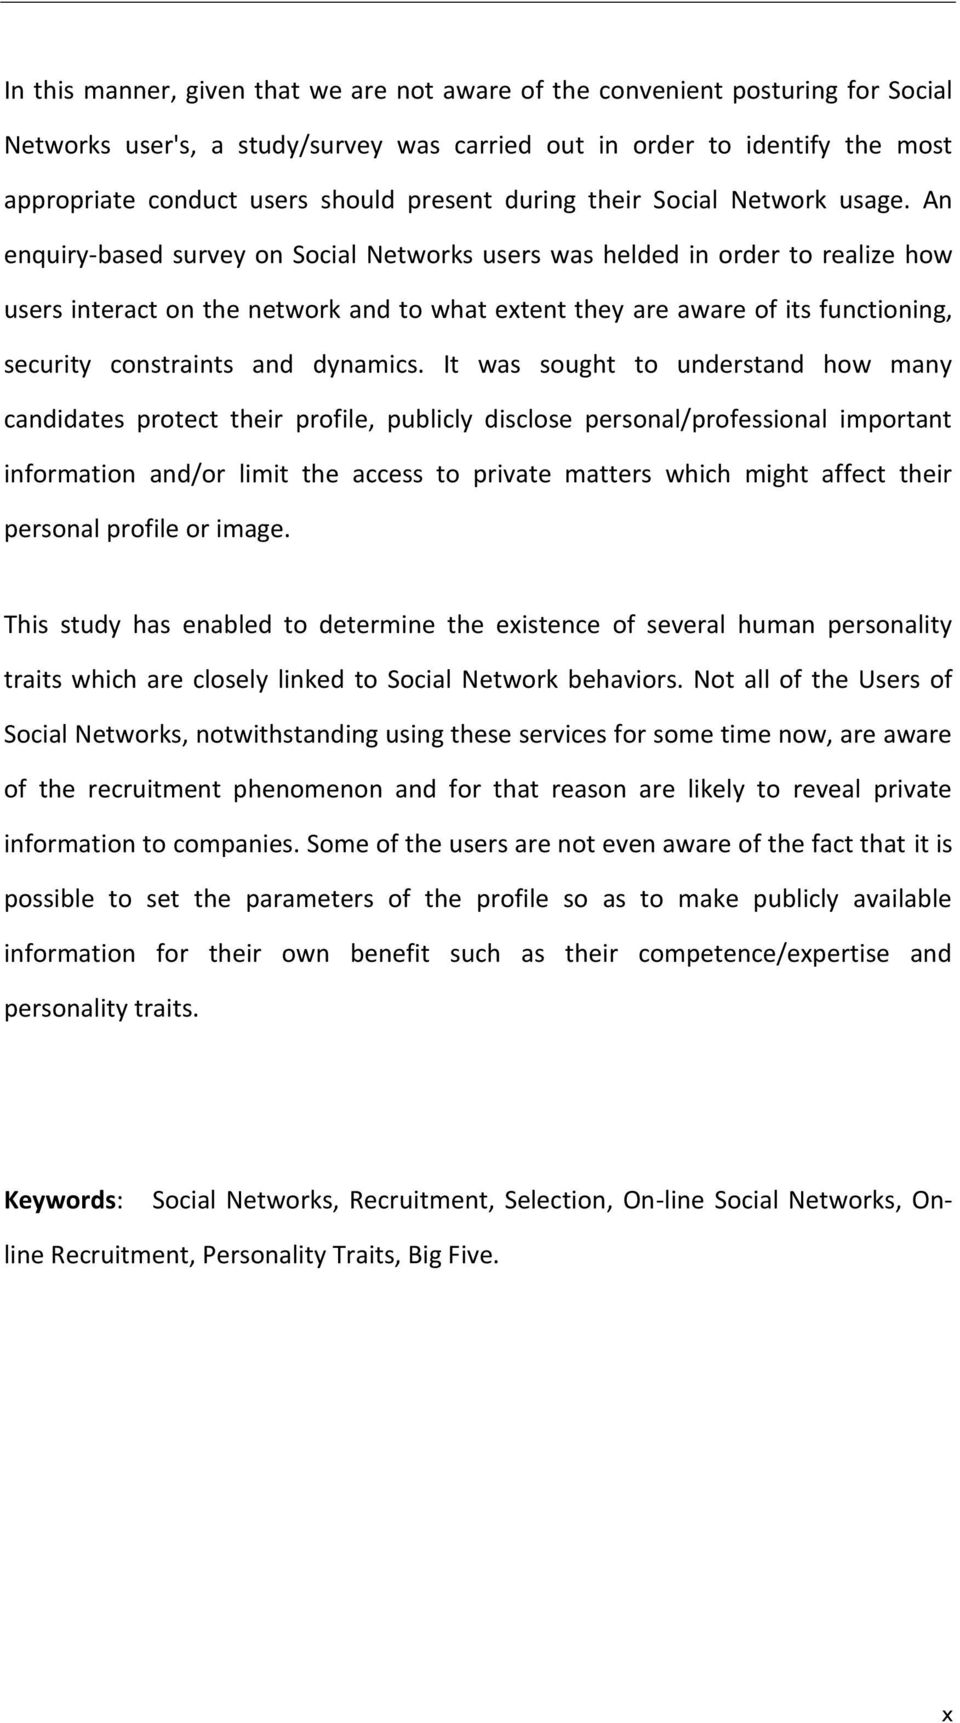 An enquiry-based survey on Social Networks users was helded in order to realize how users interact on the network and to what extent they are aware of its functioning, security constraints and